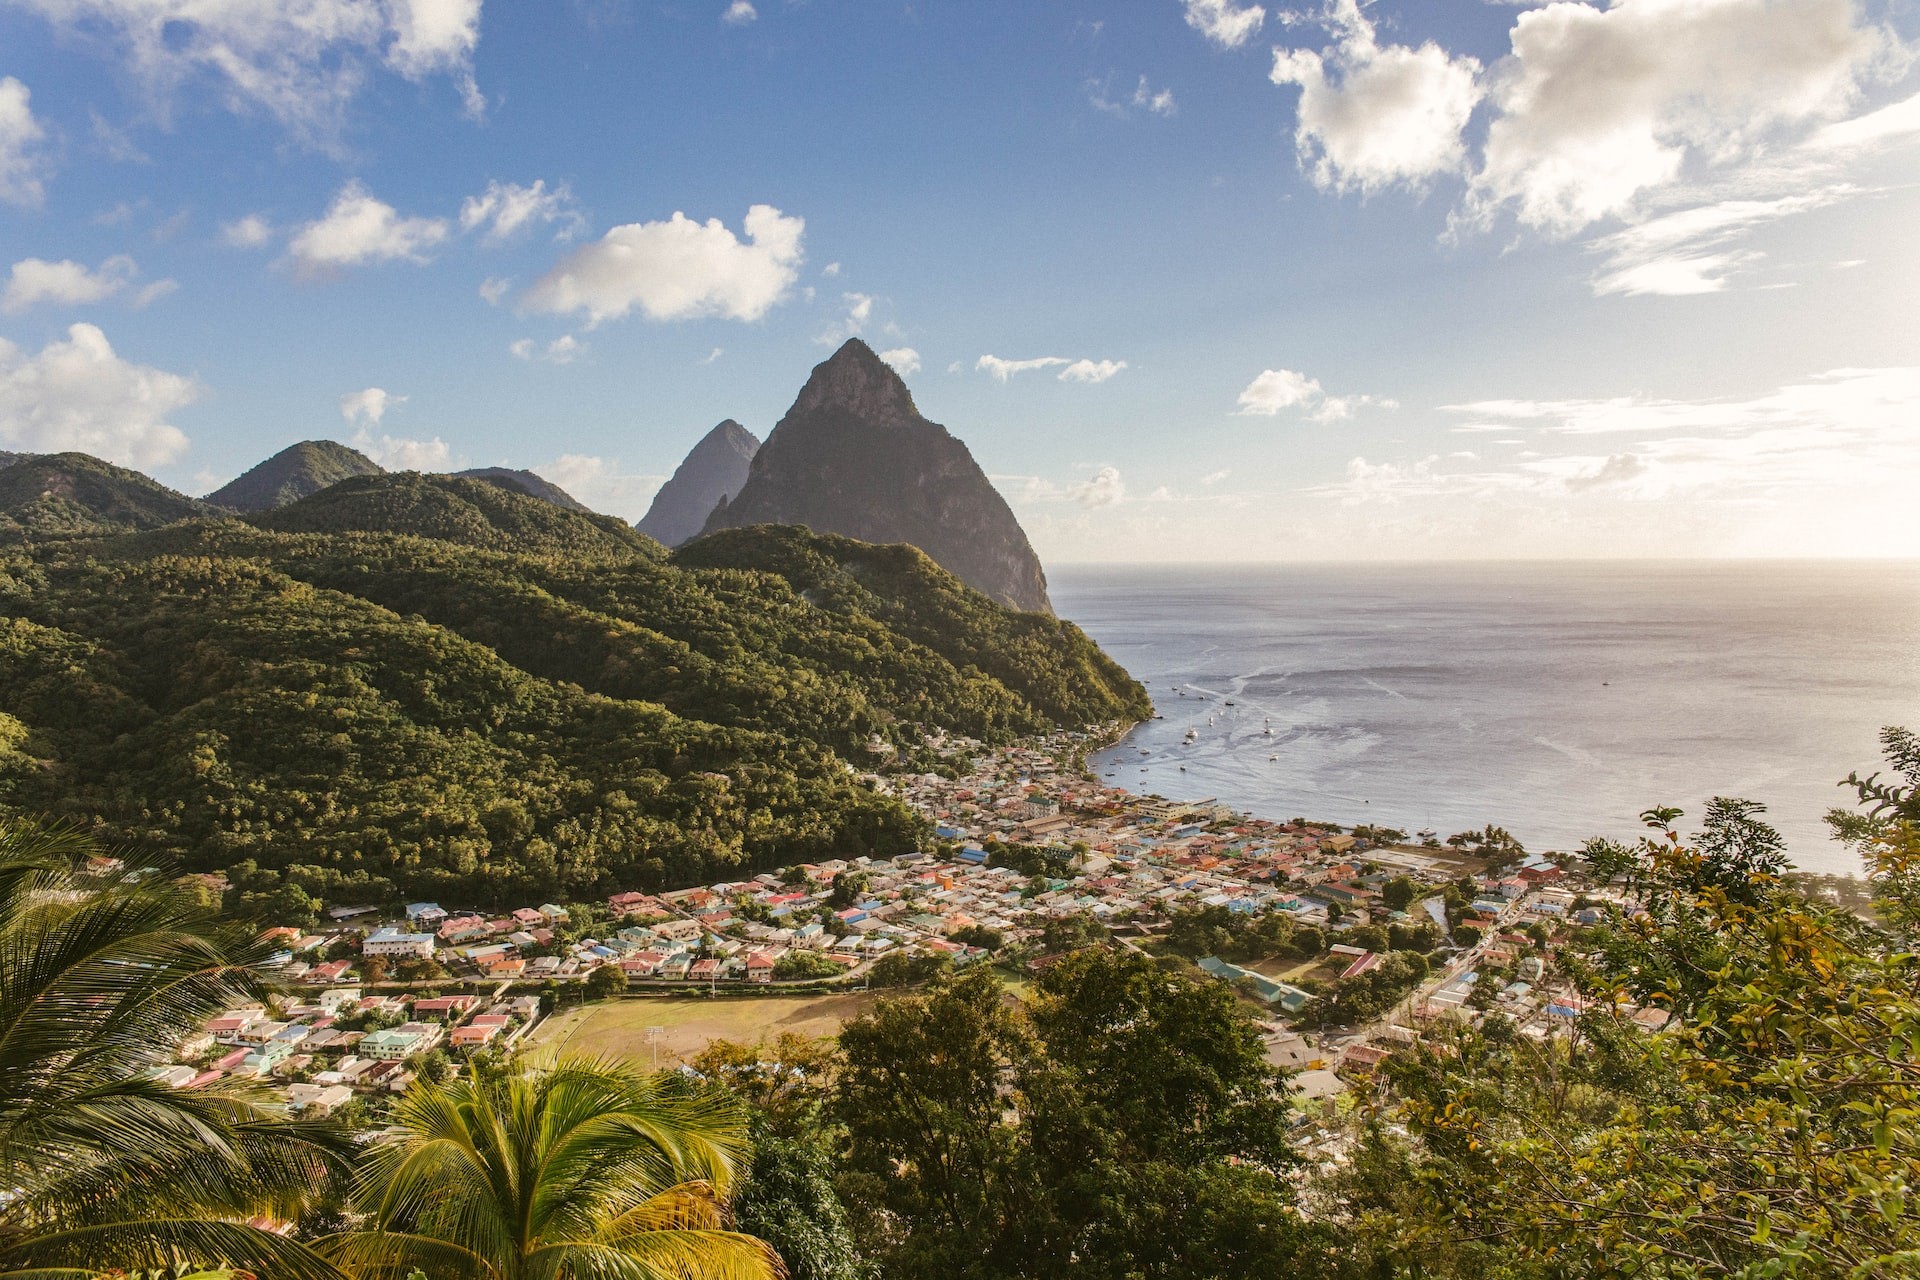 Other Saint Lucia Towns and Villages That Will Fascinate You